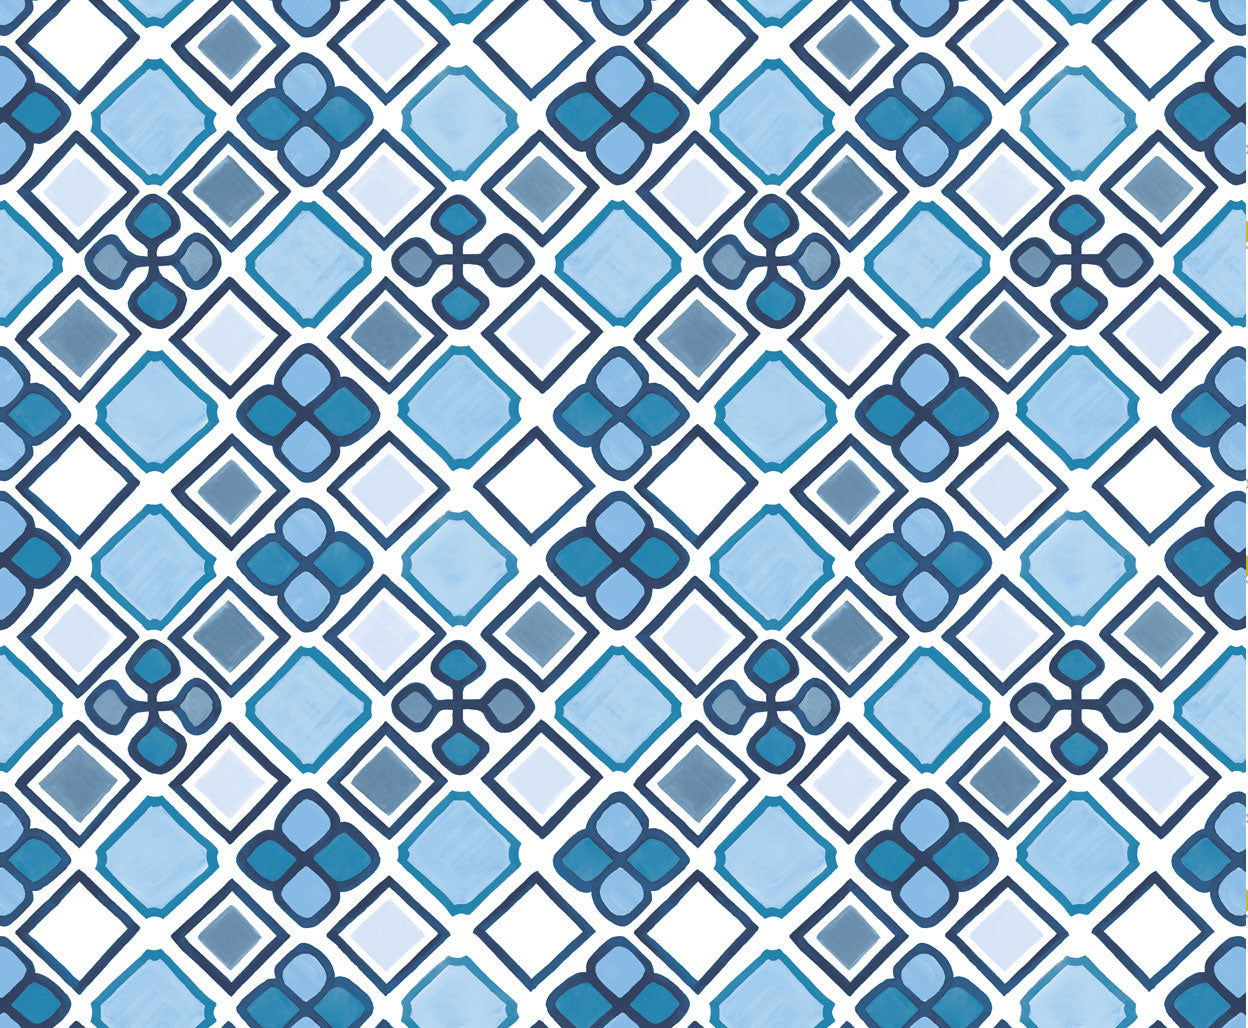 Detail of fabric in a geometric diamond and floral print in shades of blue, navy and white.